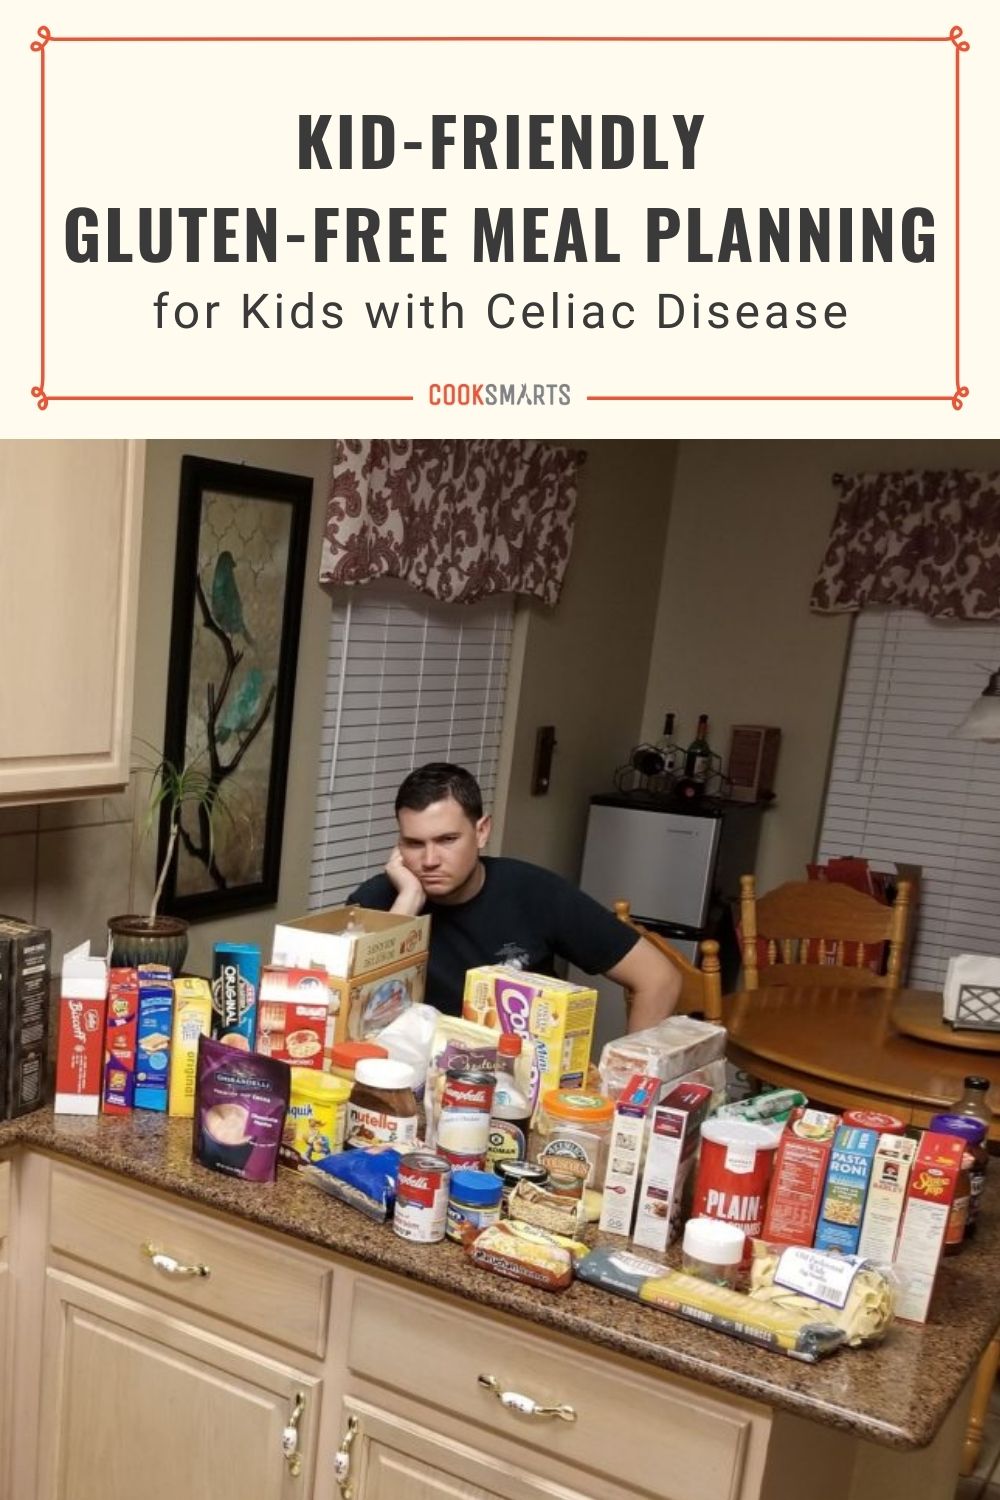 Catherine: Cooking Gluten-Free for Kids with Celiac Disease | Cook Smarts Kitchen Hero